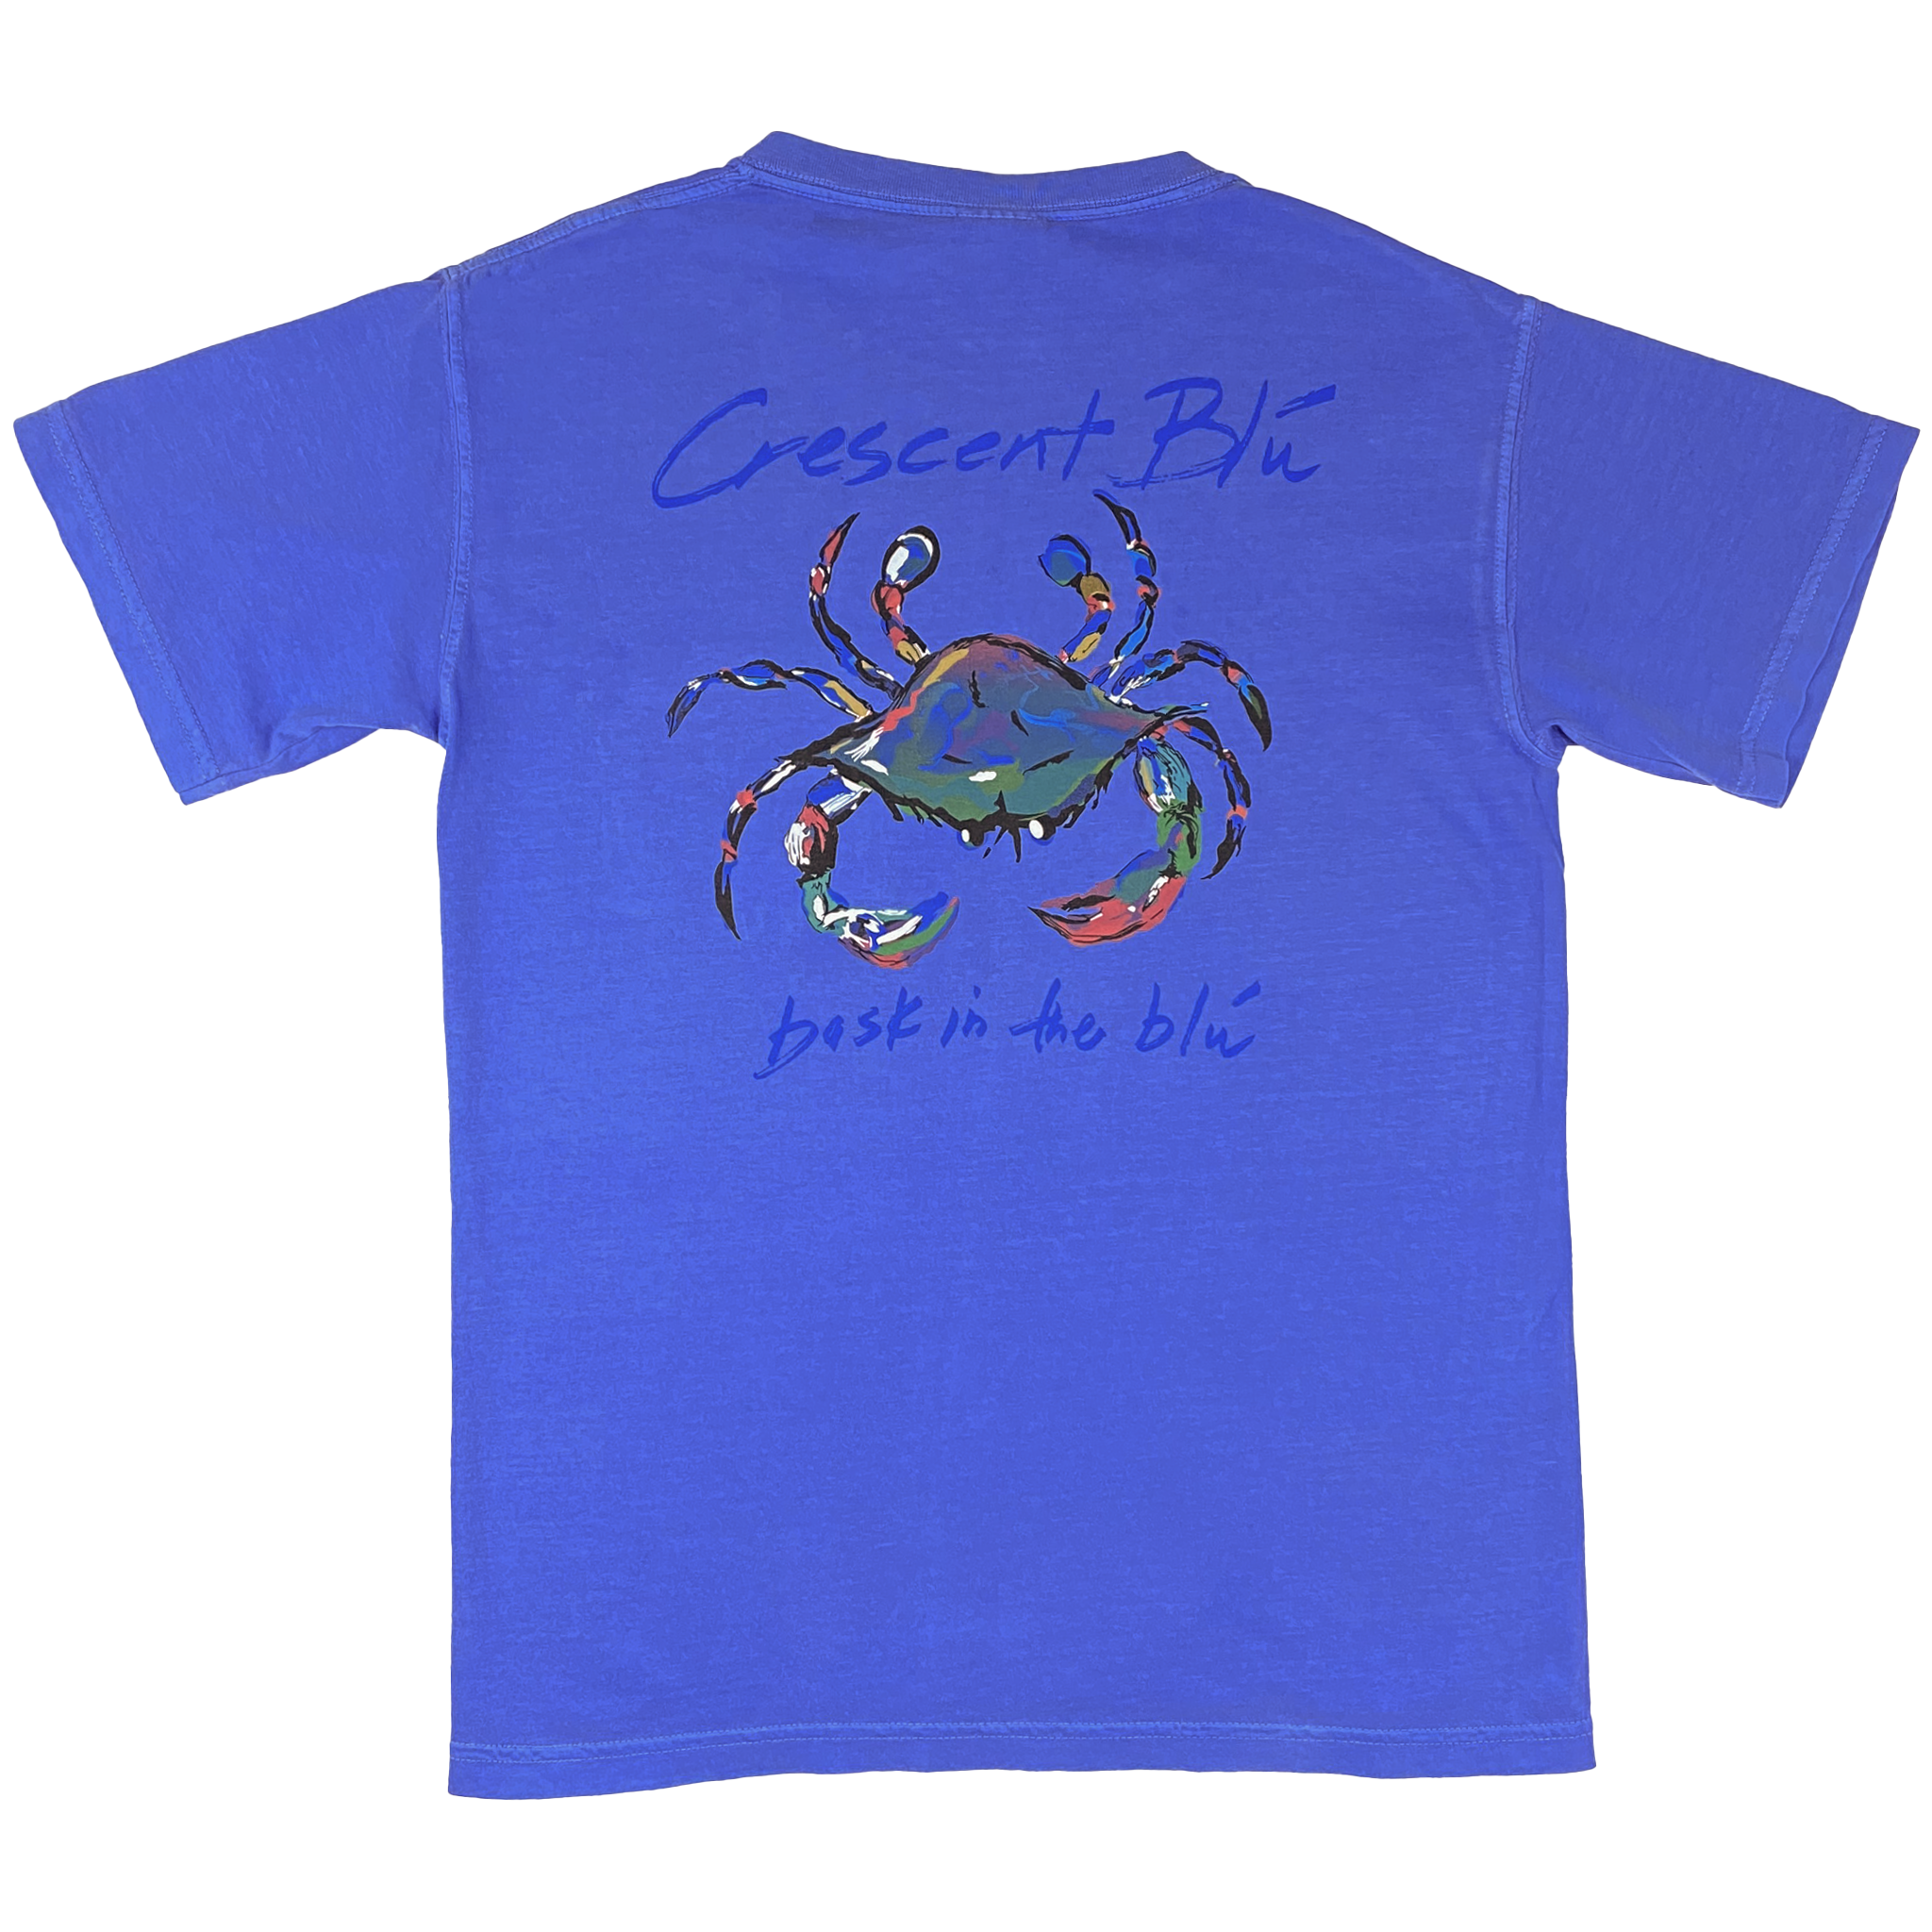 Image of back of Adult short sleeve t-shirt in Flo Blue color with vibrant multi-colored Crescent Blu crab logo printed